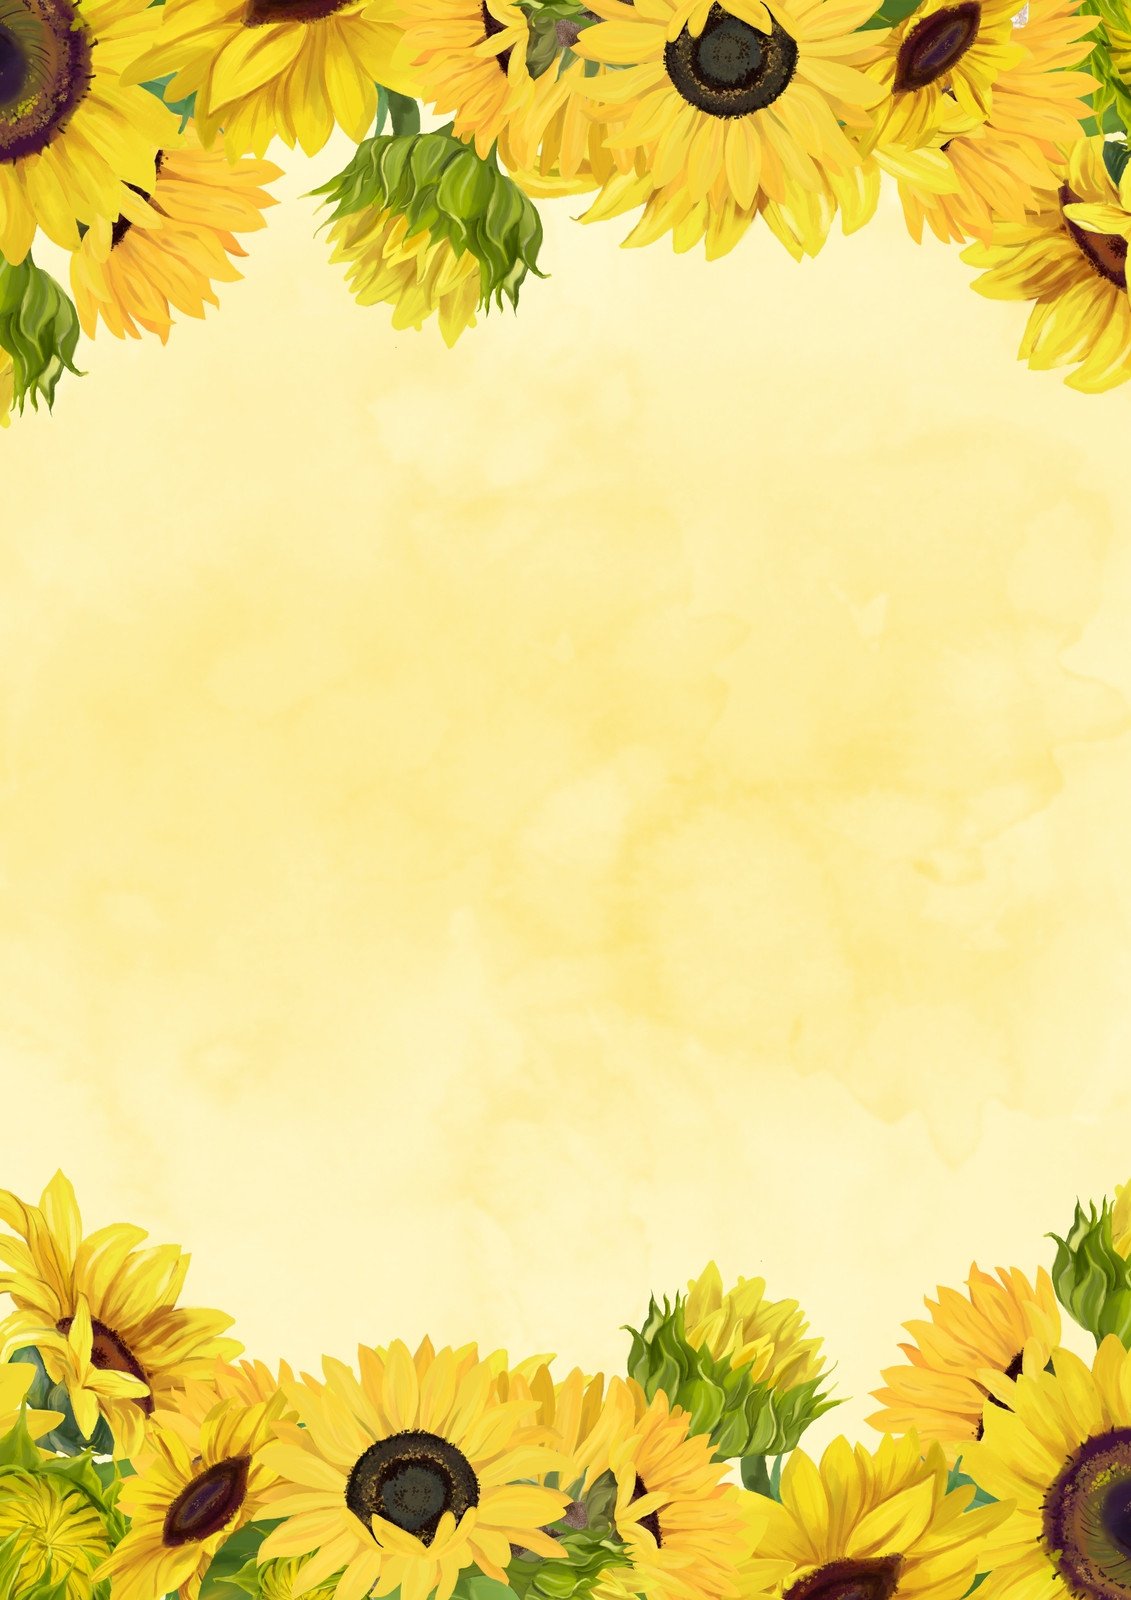 Free and customizable sunflower templates